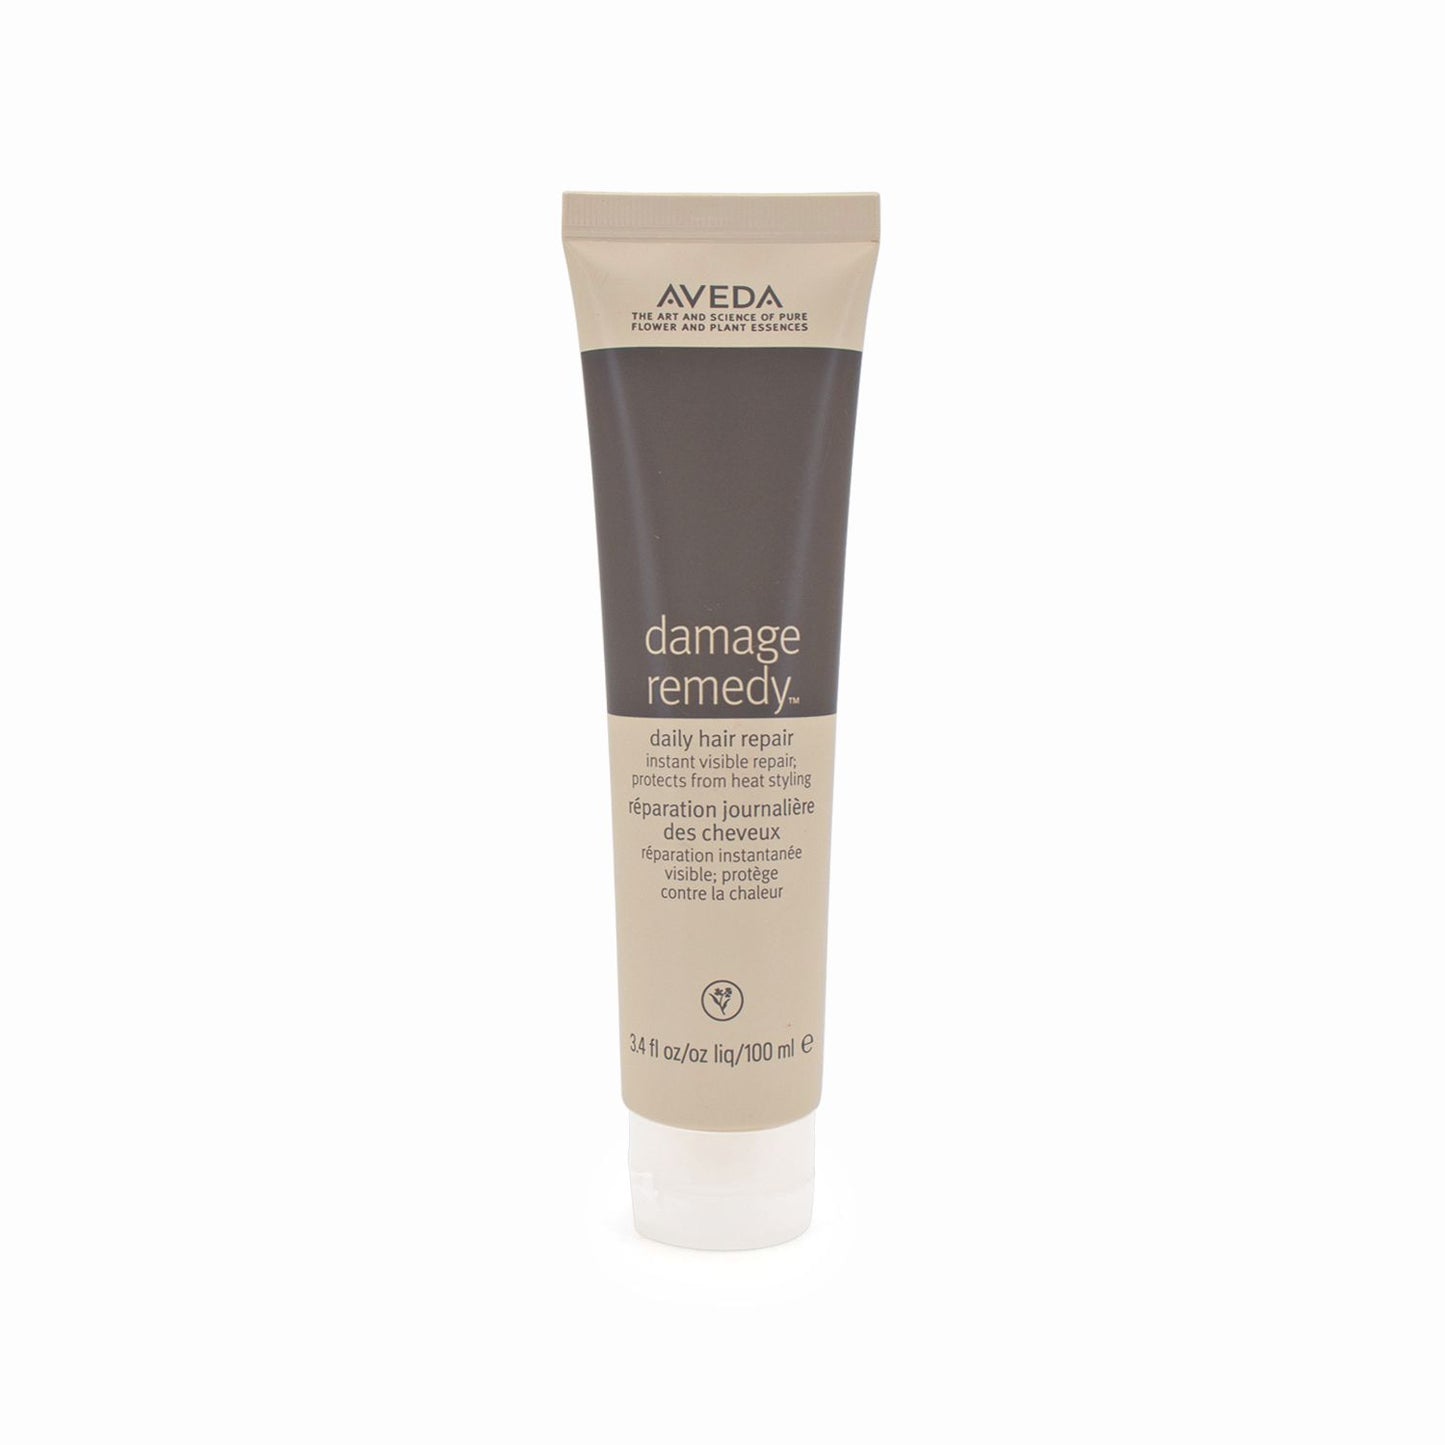 Aveda Damage Remedy Daily Hair Repair 100ml - Imperfect Container